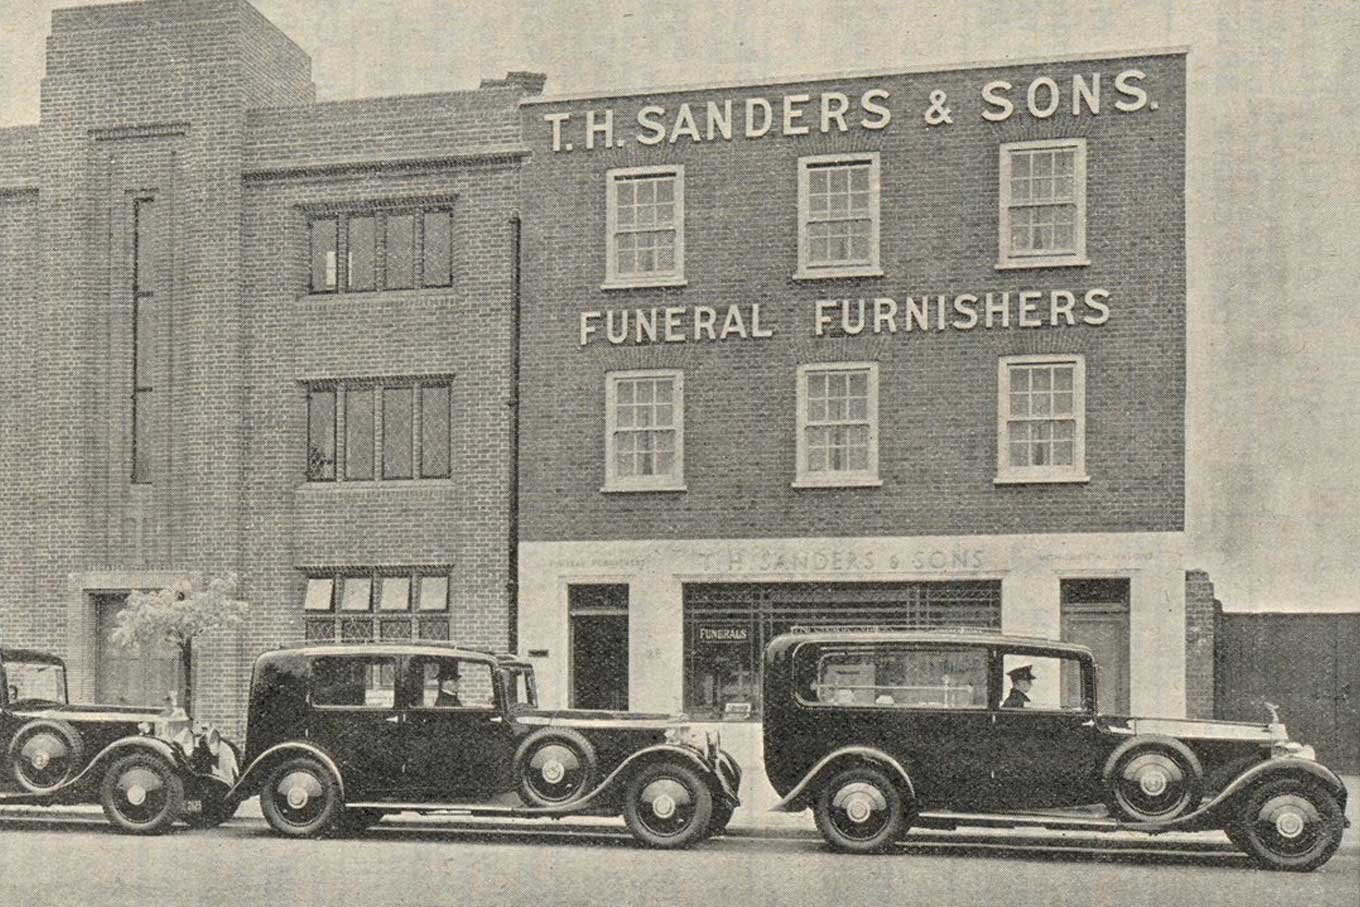 an historical image of TH Sanders funeral directors